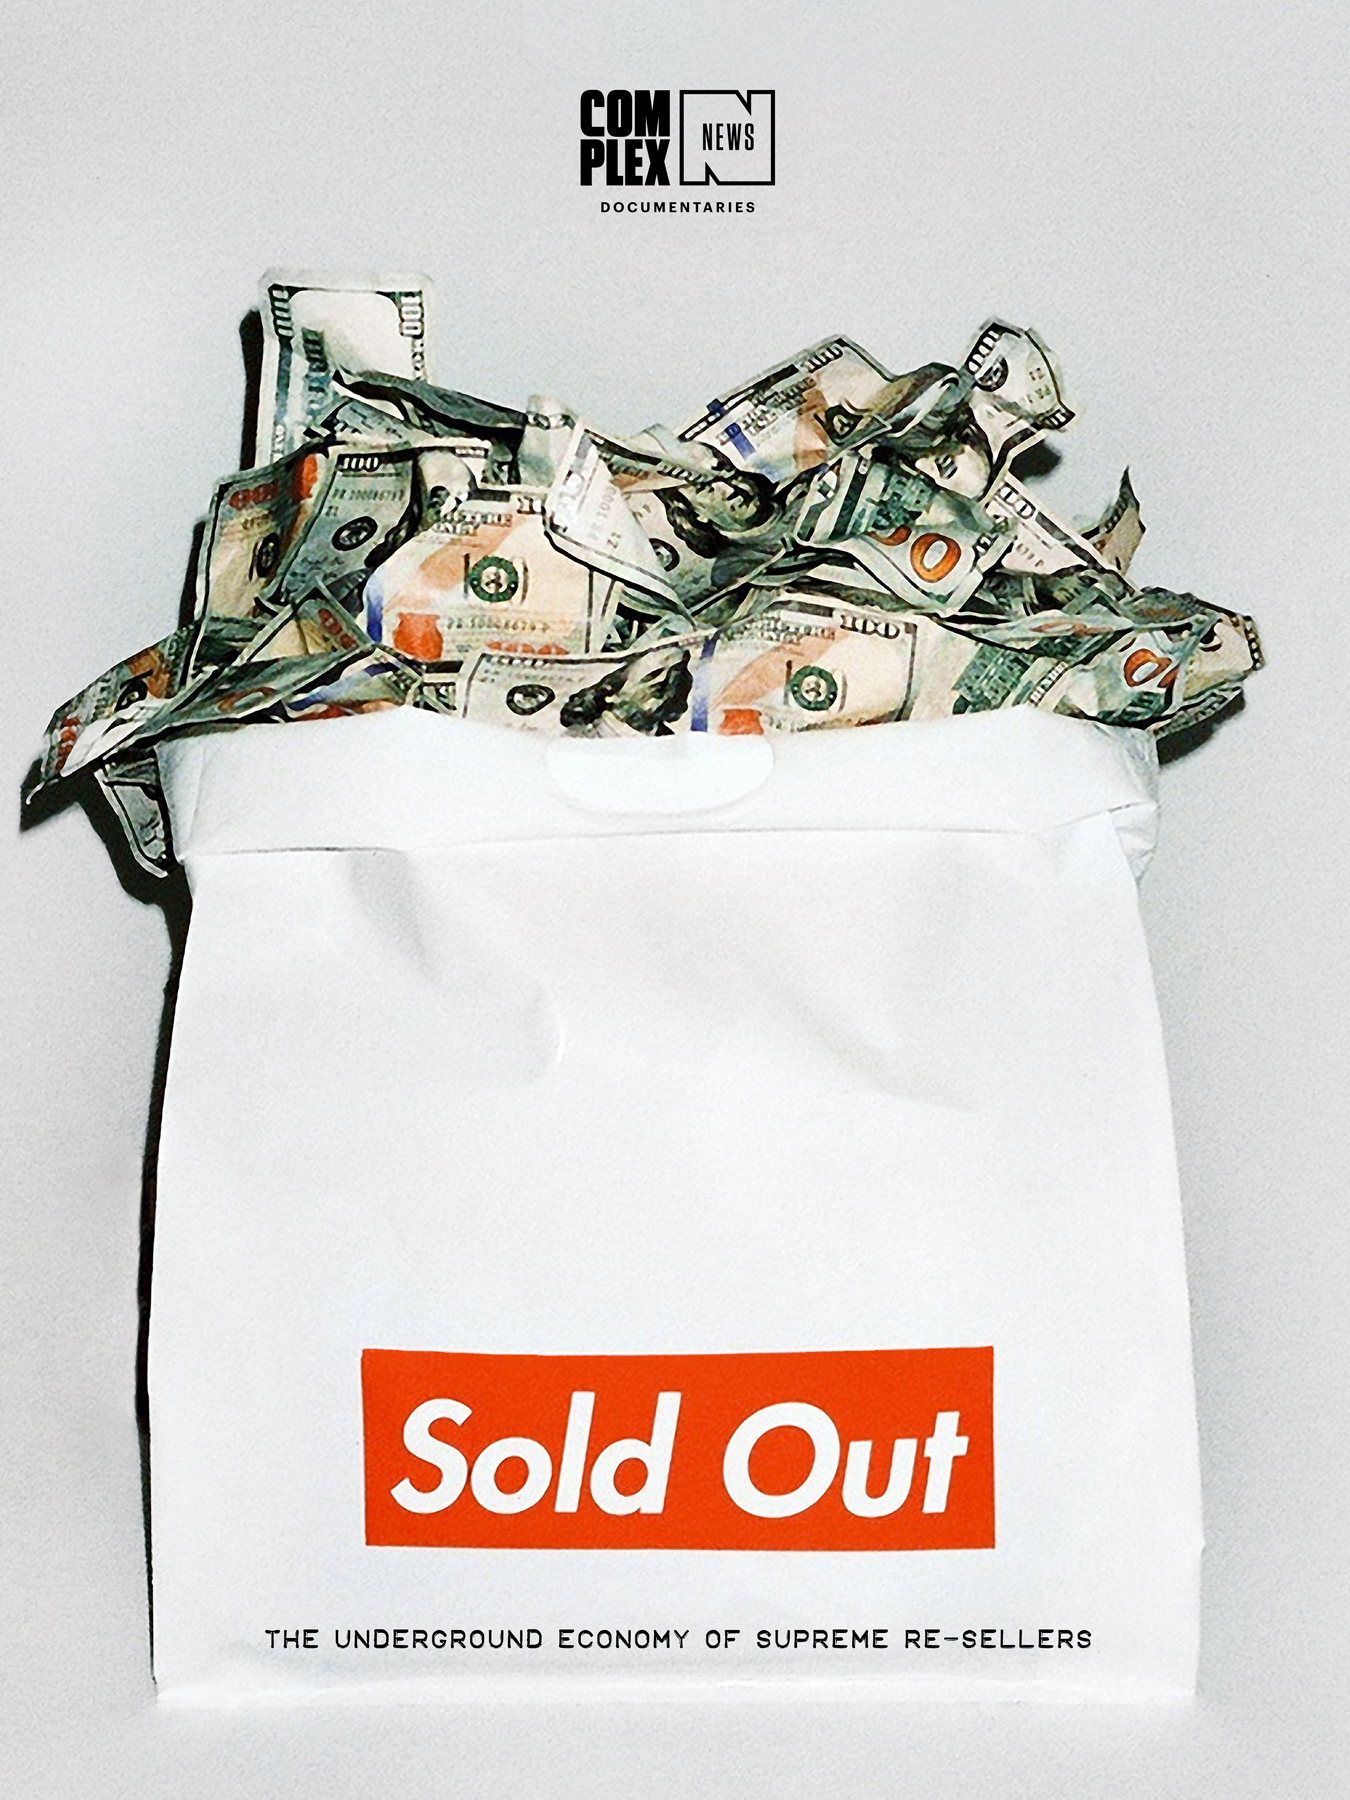 Complex News Documentaries: Sold Out - The Underground Economy of Supreme Re-Sellers